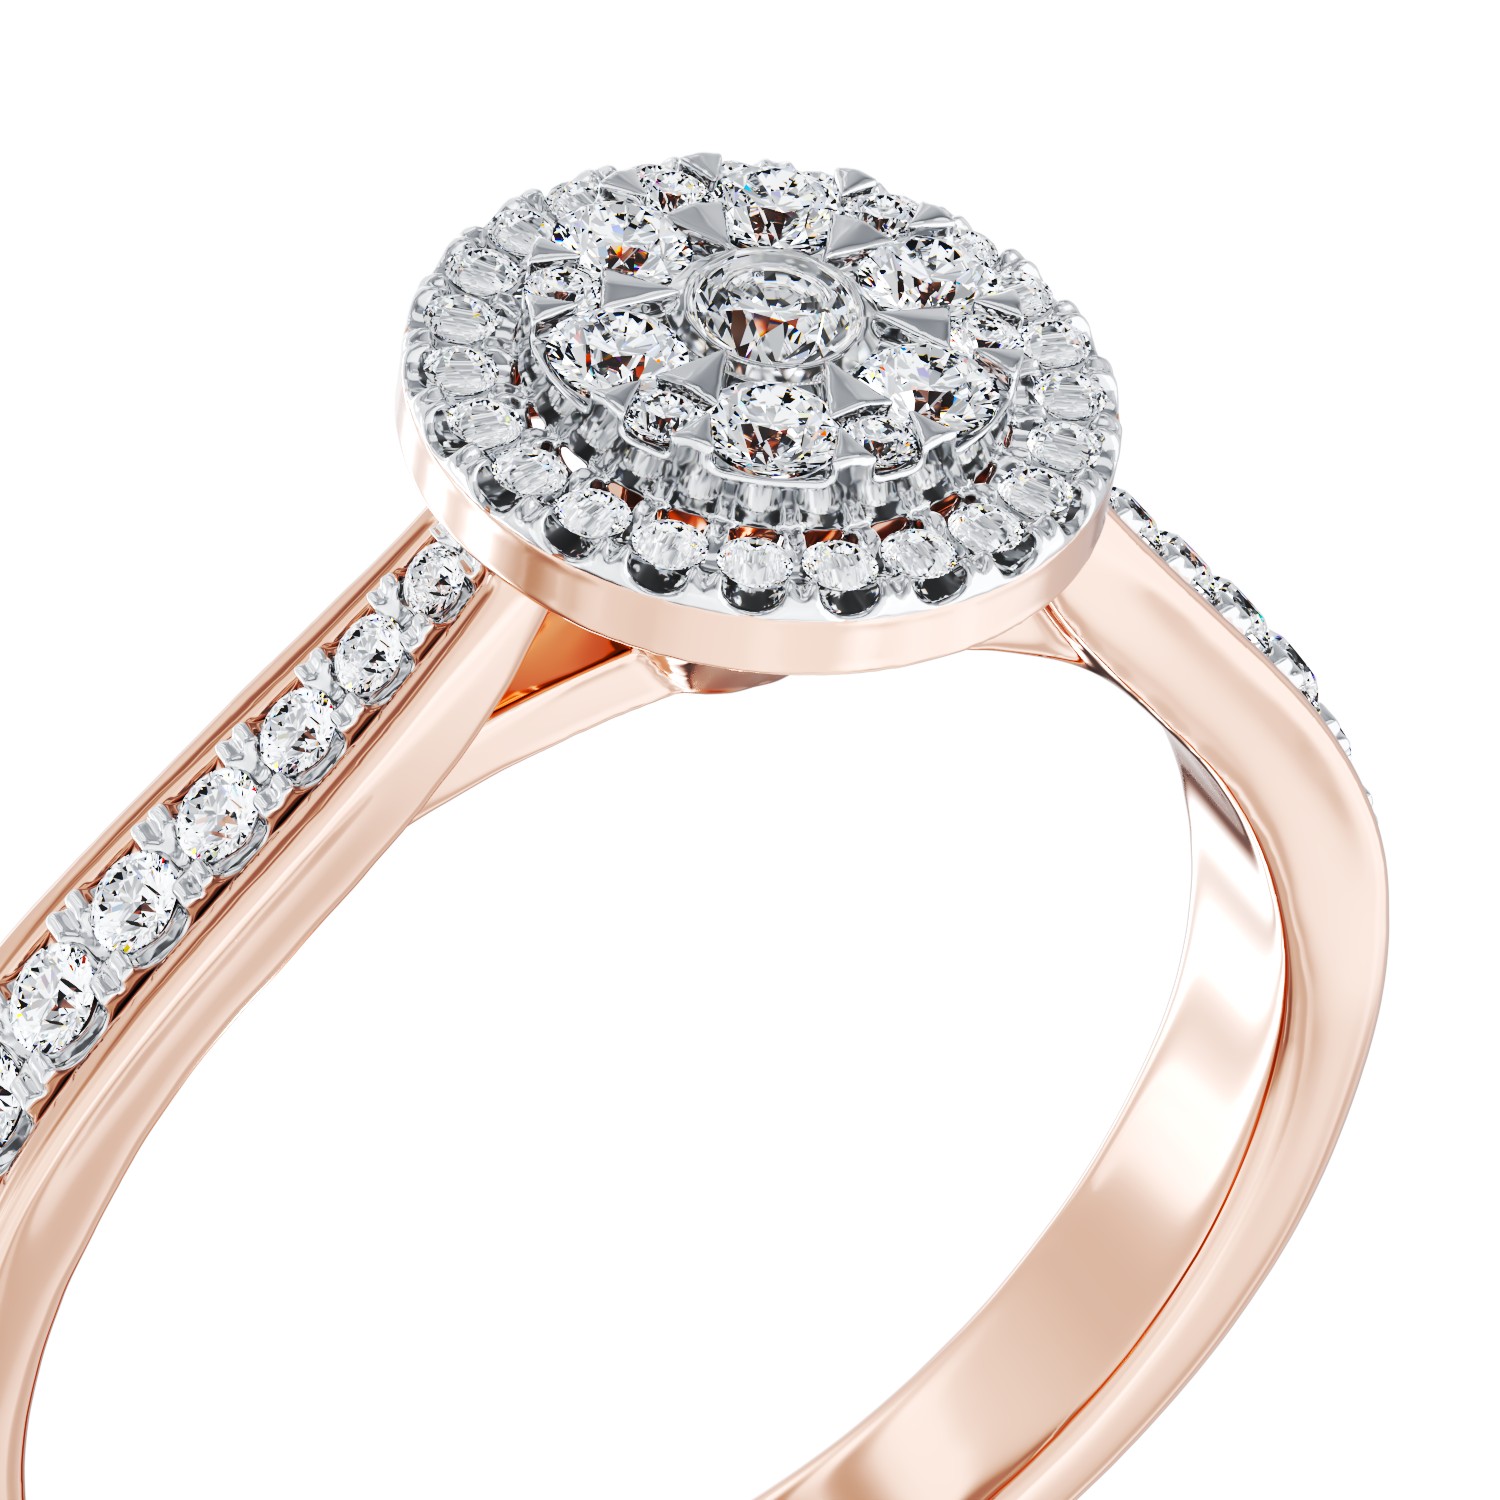 18K rose gold engagement ring with diamonds of 0.427ct